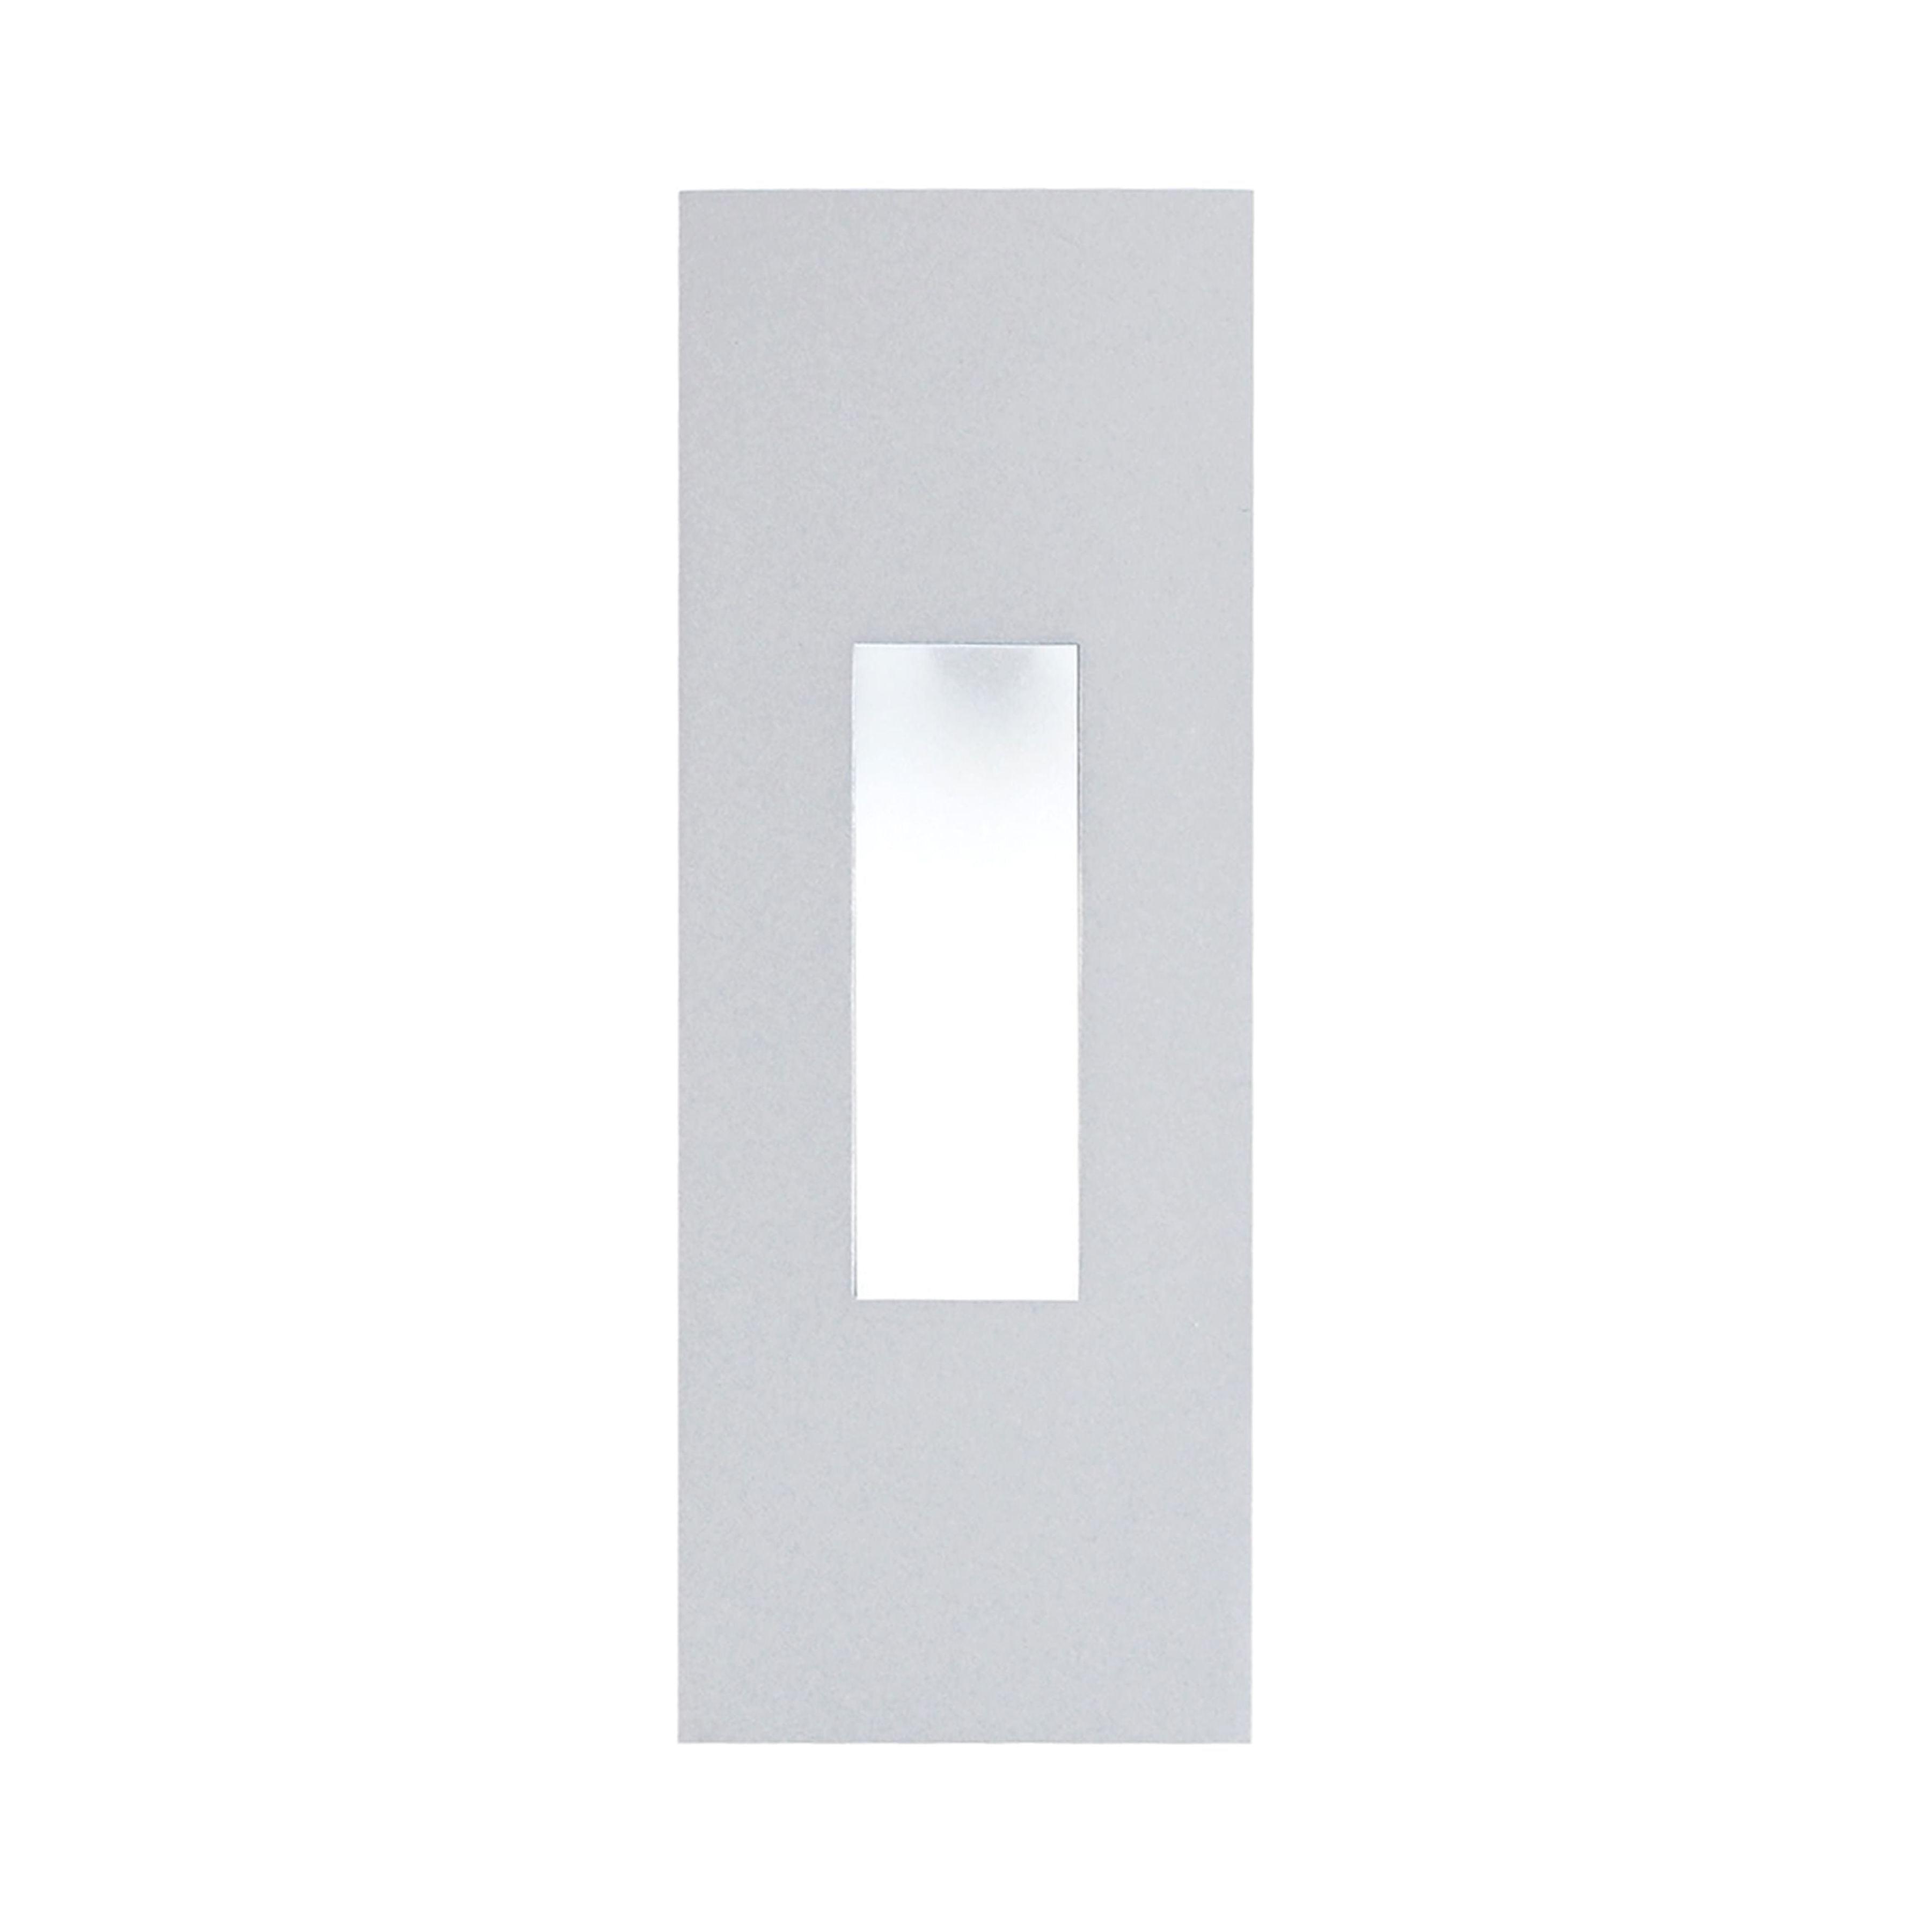 WLE106SQ32K-5-16 - Scope LED Wall Niche, Squared Edges with Lamp - Frosted Lens